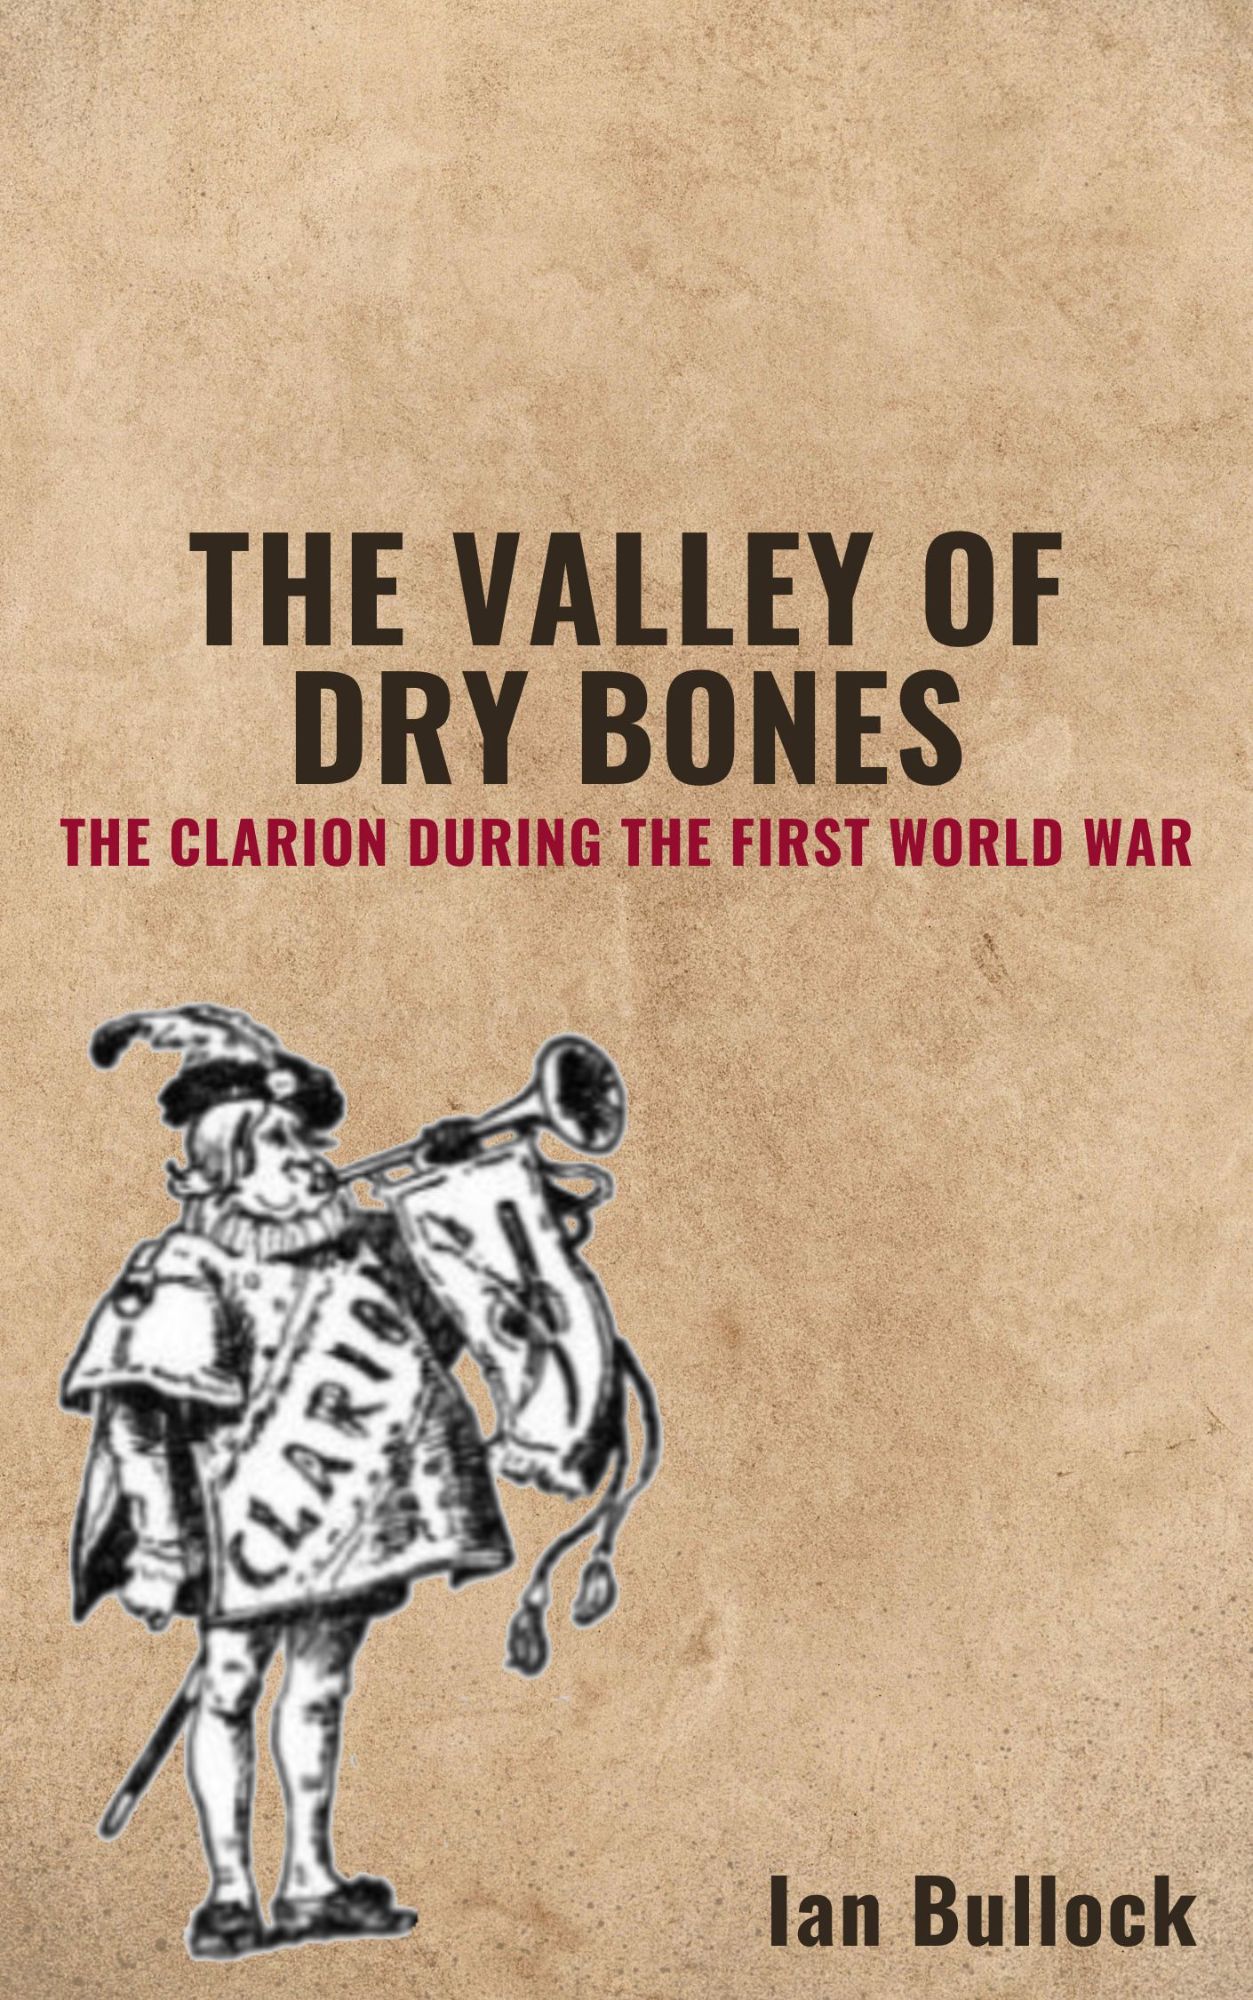 The Valley of Dry Bones.  The Clarion during the First World War